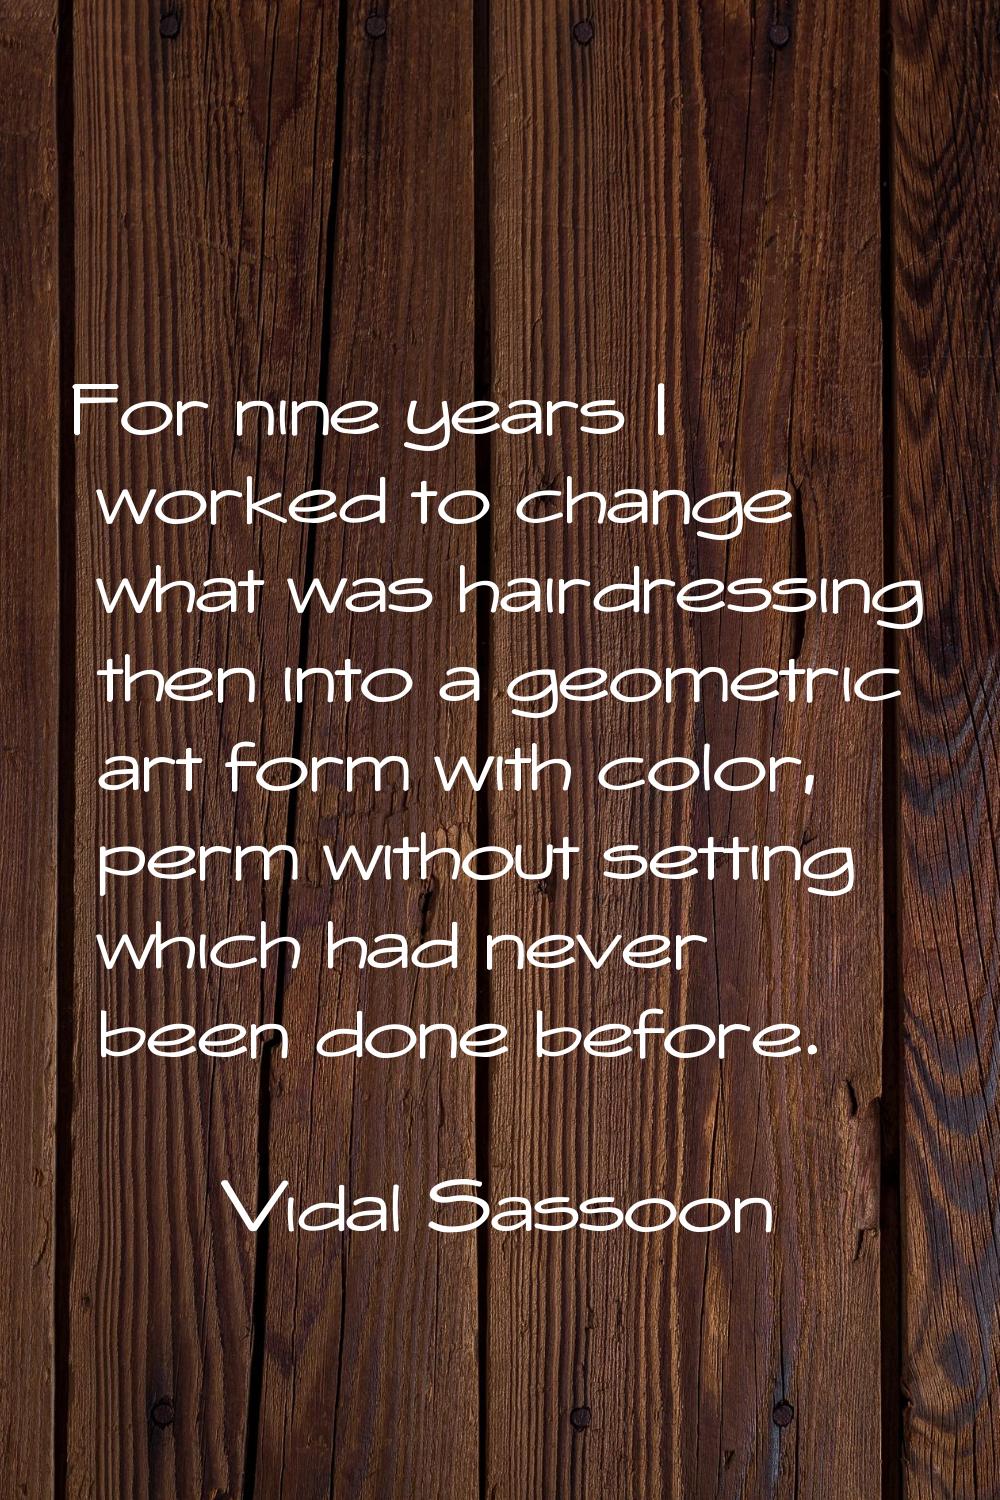 For nine years I worked to change what was hairdressing then into a geometric art form with color, 